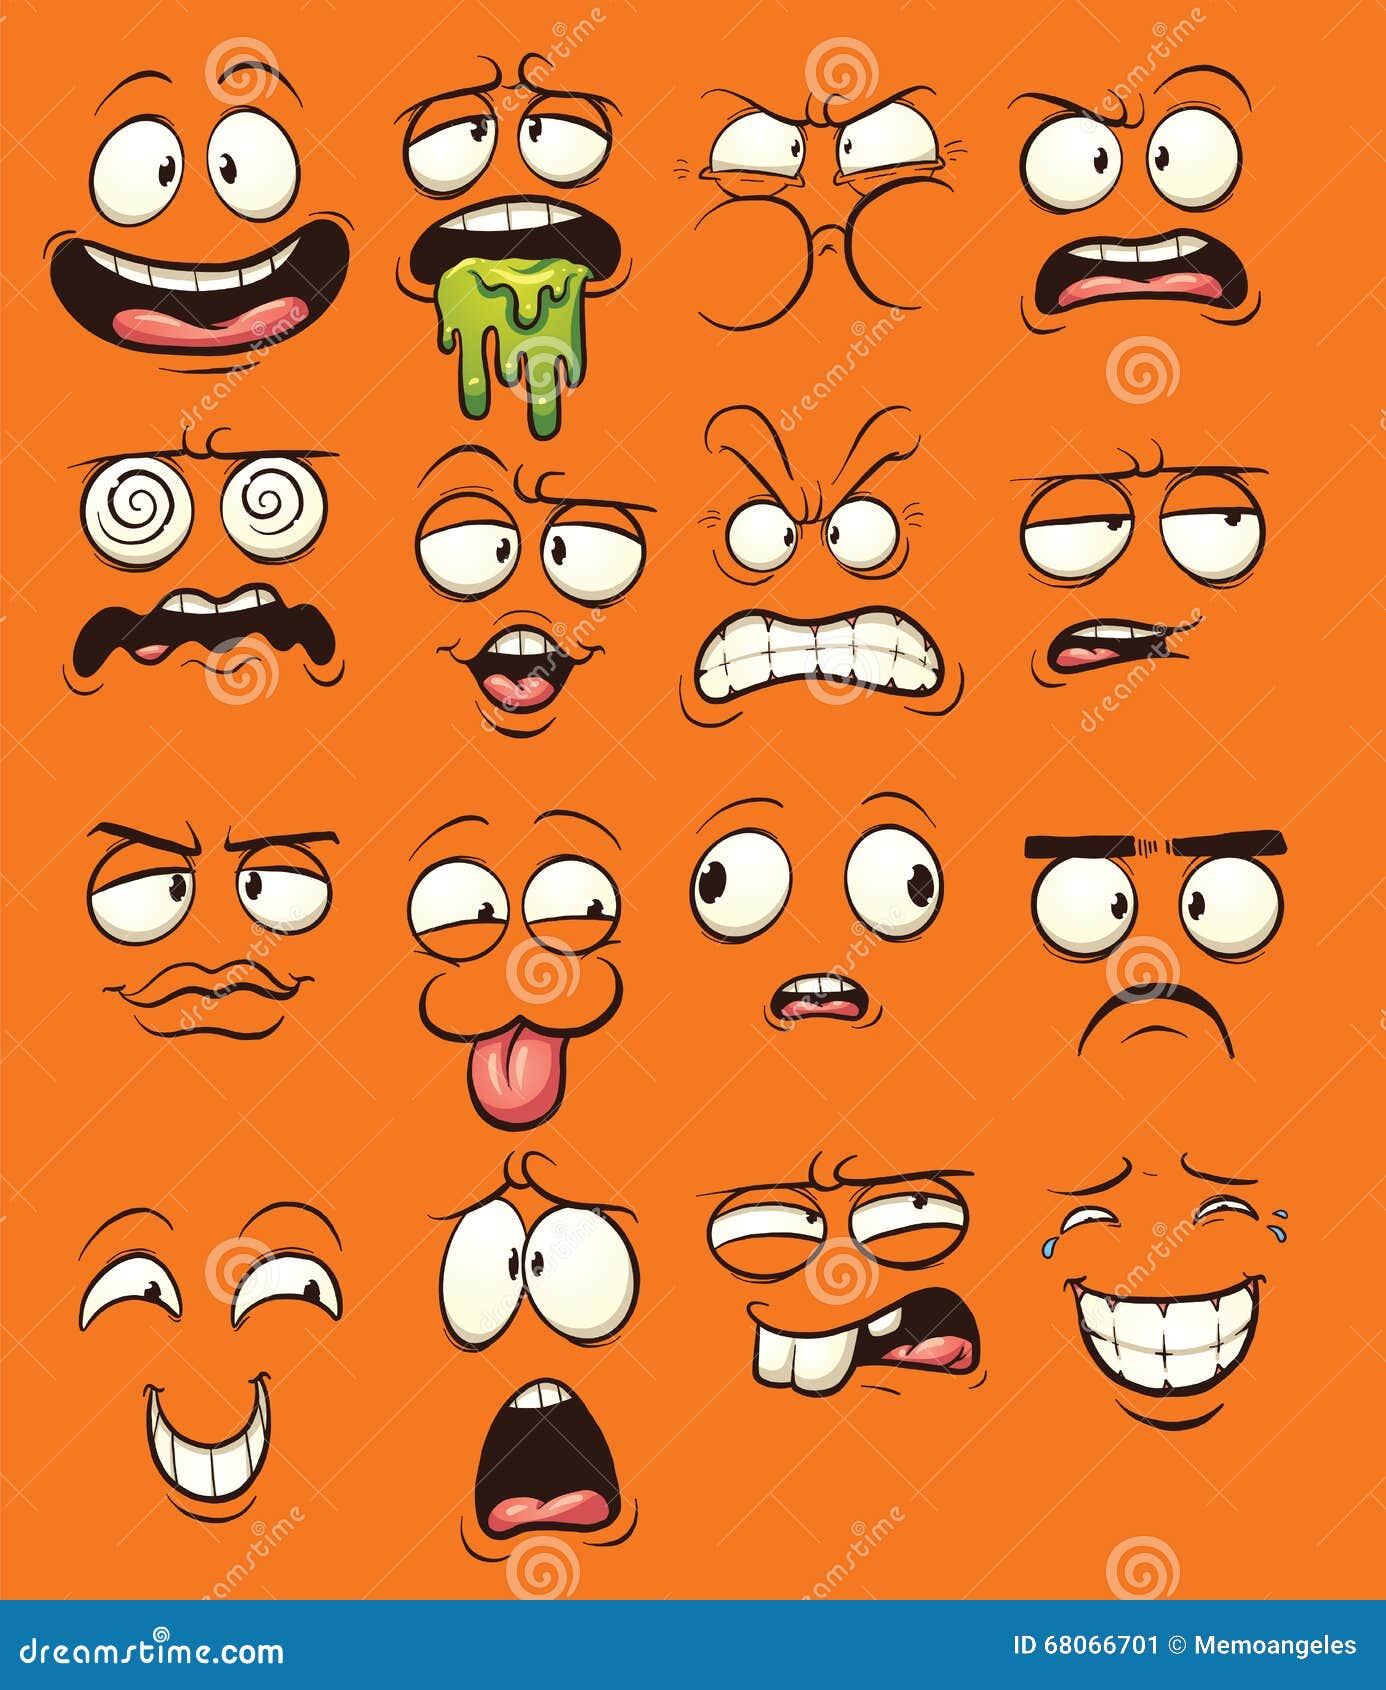 Cartoon faces stock vector. Illustration of shocked, puking - 68066701